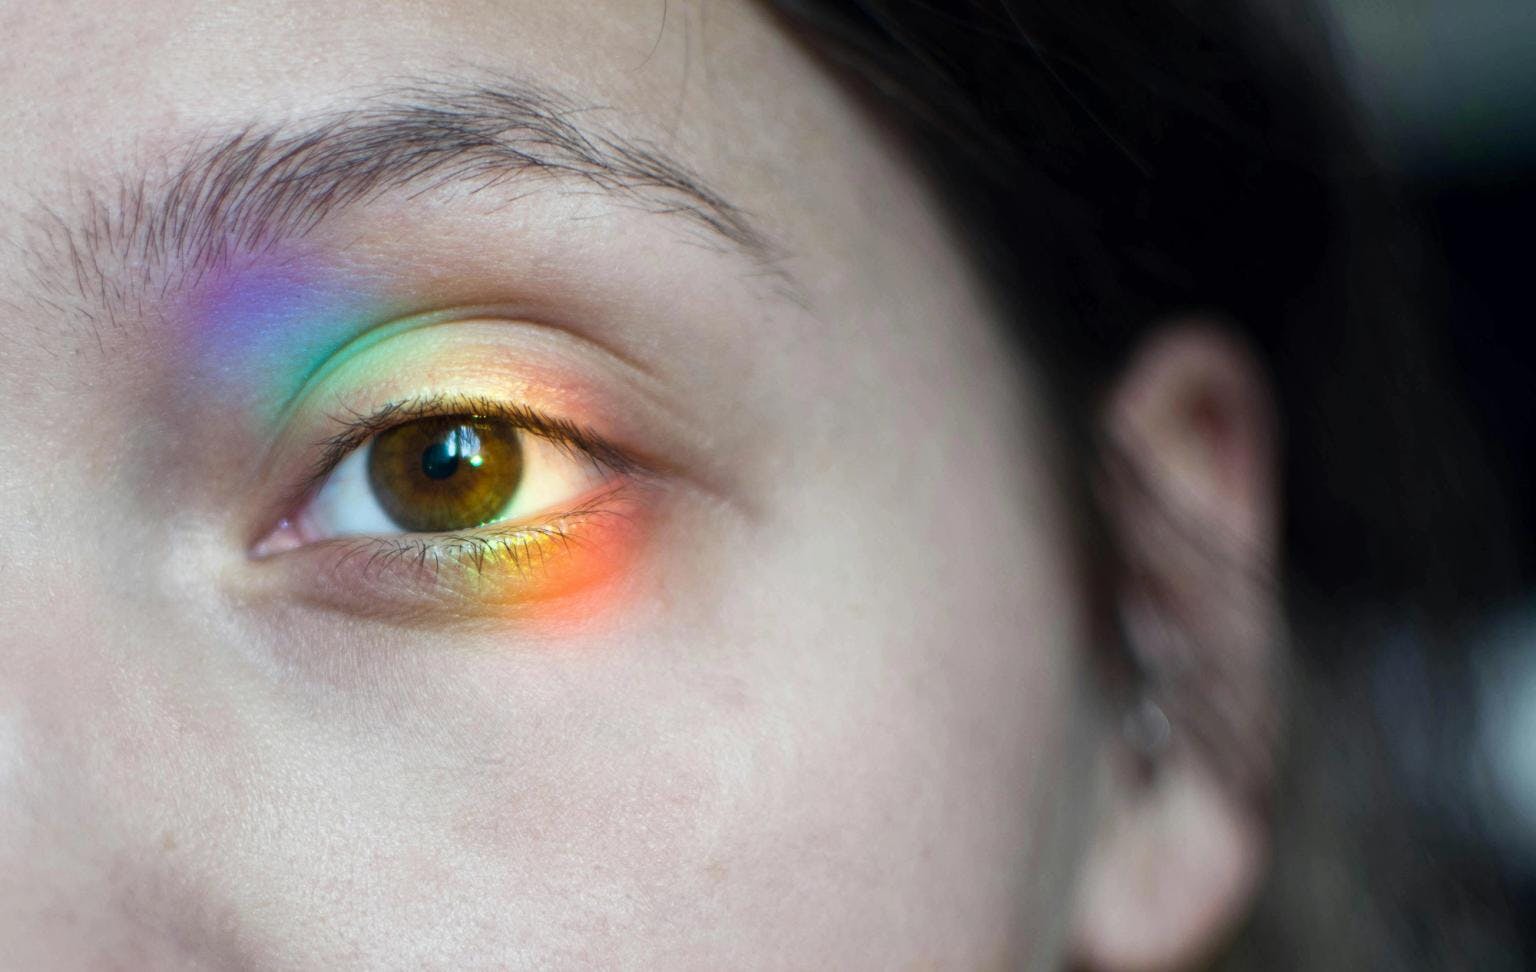 A close up of a woman's eye with a a rainbow prism of light shining on it